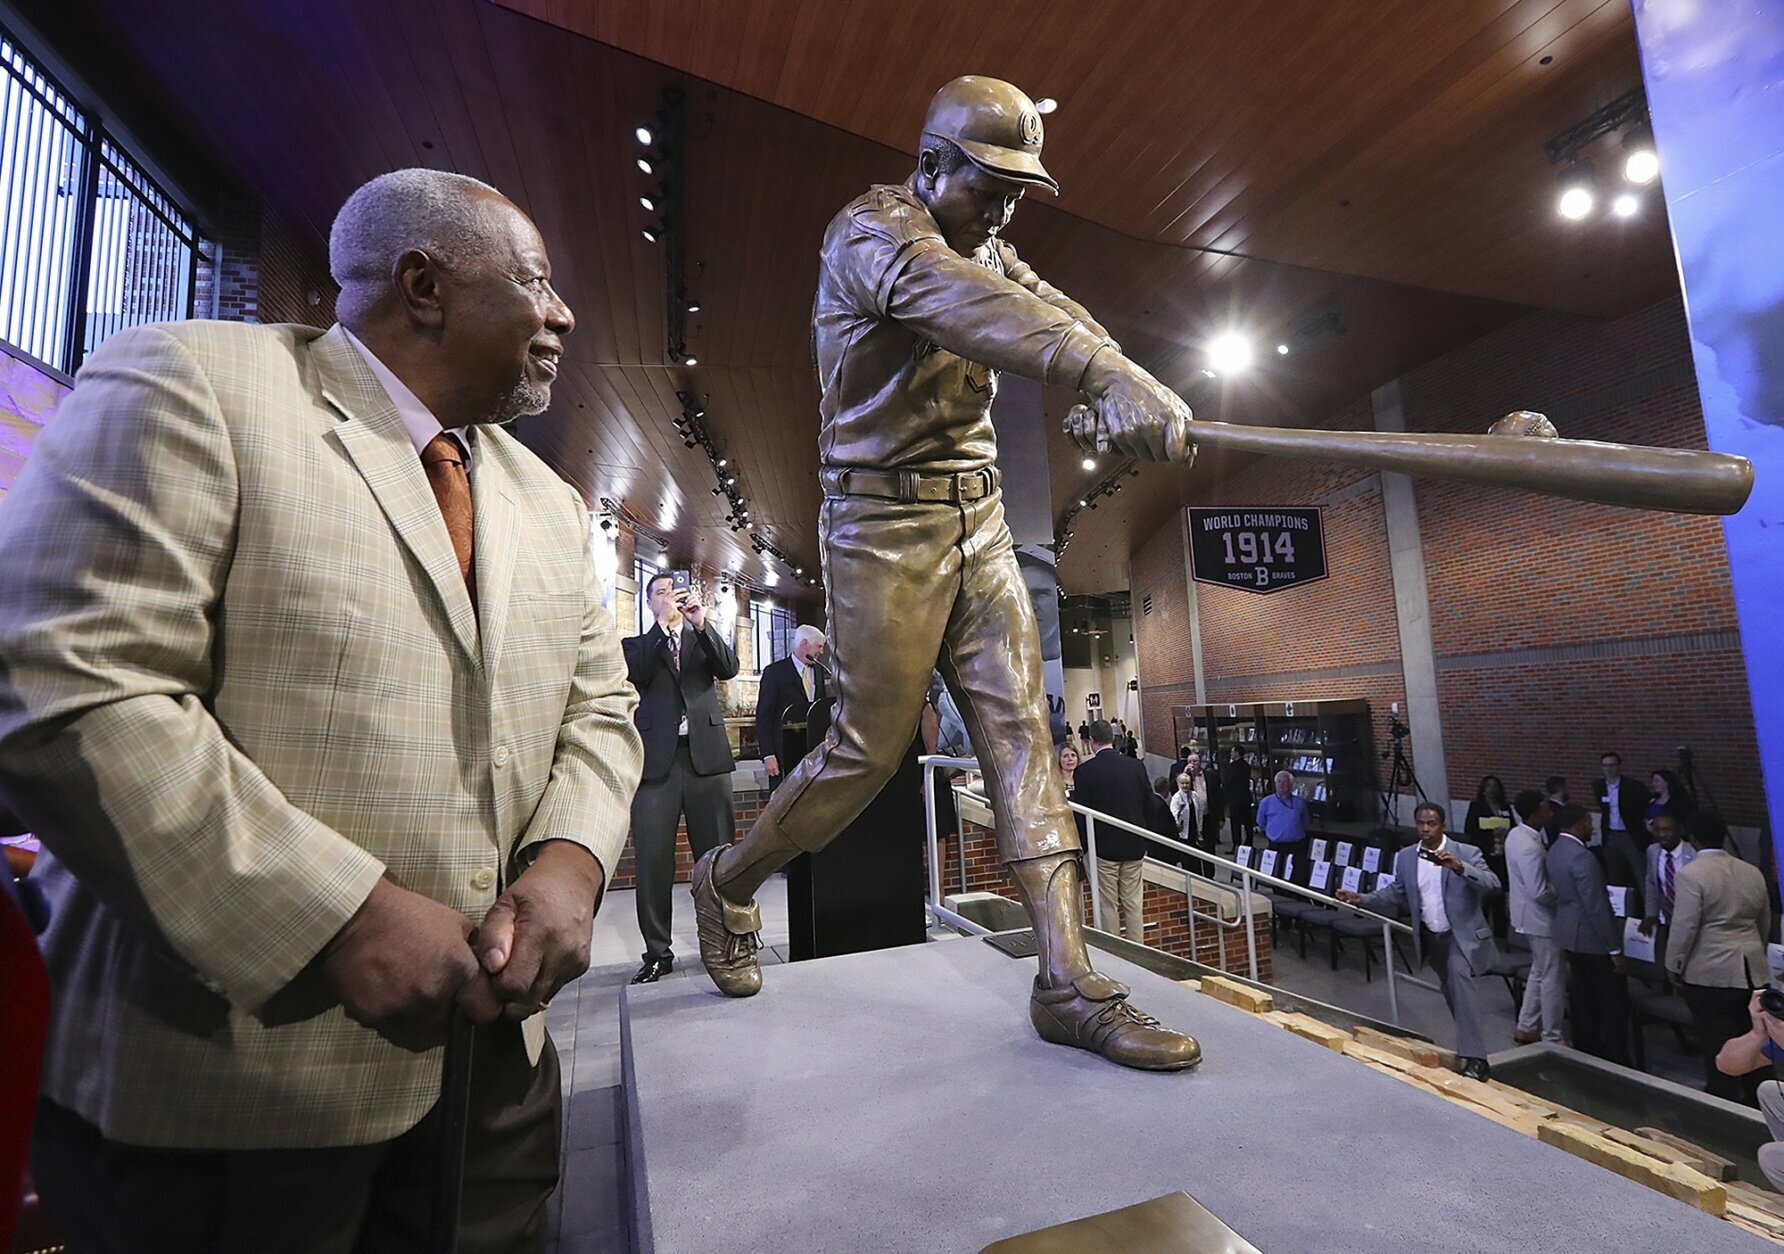 FILE-  In this March 29, 2017, file photo, Hank Aaron looks at his new statue in Monument Garden at SunTrust Park, home of the Atlanta Braves, after the unveiling ceremony in Atlanta. Hank Aaron, who endured racist threats with stoic dignity during his pursuit of Babe Ruth but went on to break the career home run record in the pre-steroids era, died early Friday, Jan. 22, 2021. He was 86. The Atlanta Braves said Aaron died peacefully in his sleep. No cause of death was given. (Curtis Compton/Atlanta Journal-Constitution via AP, File)